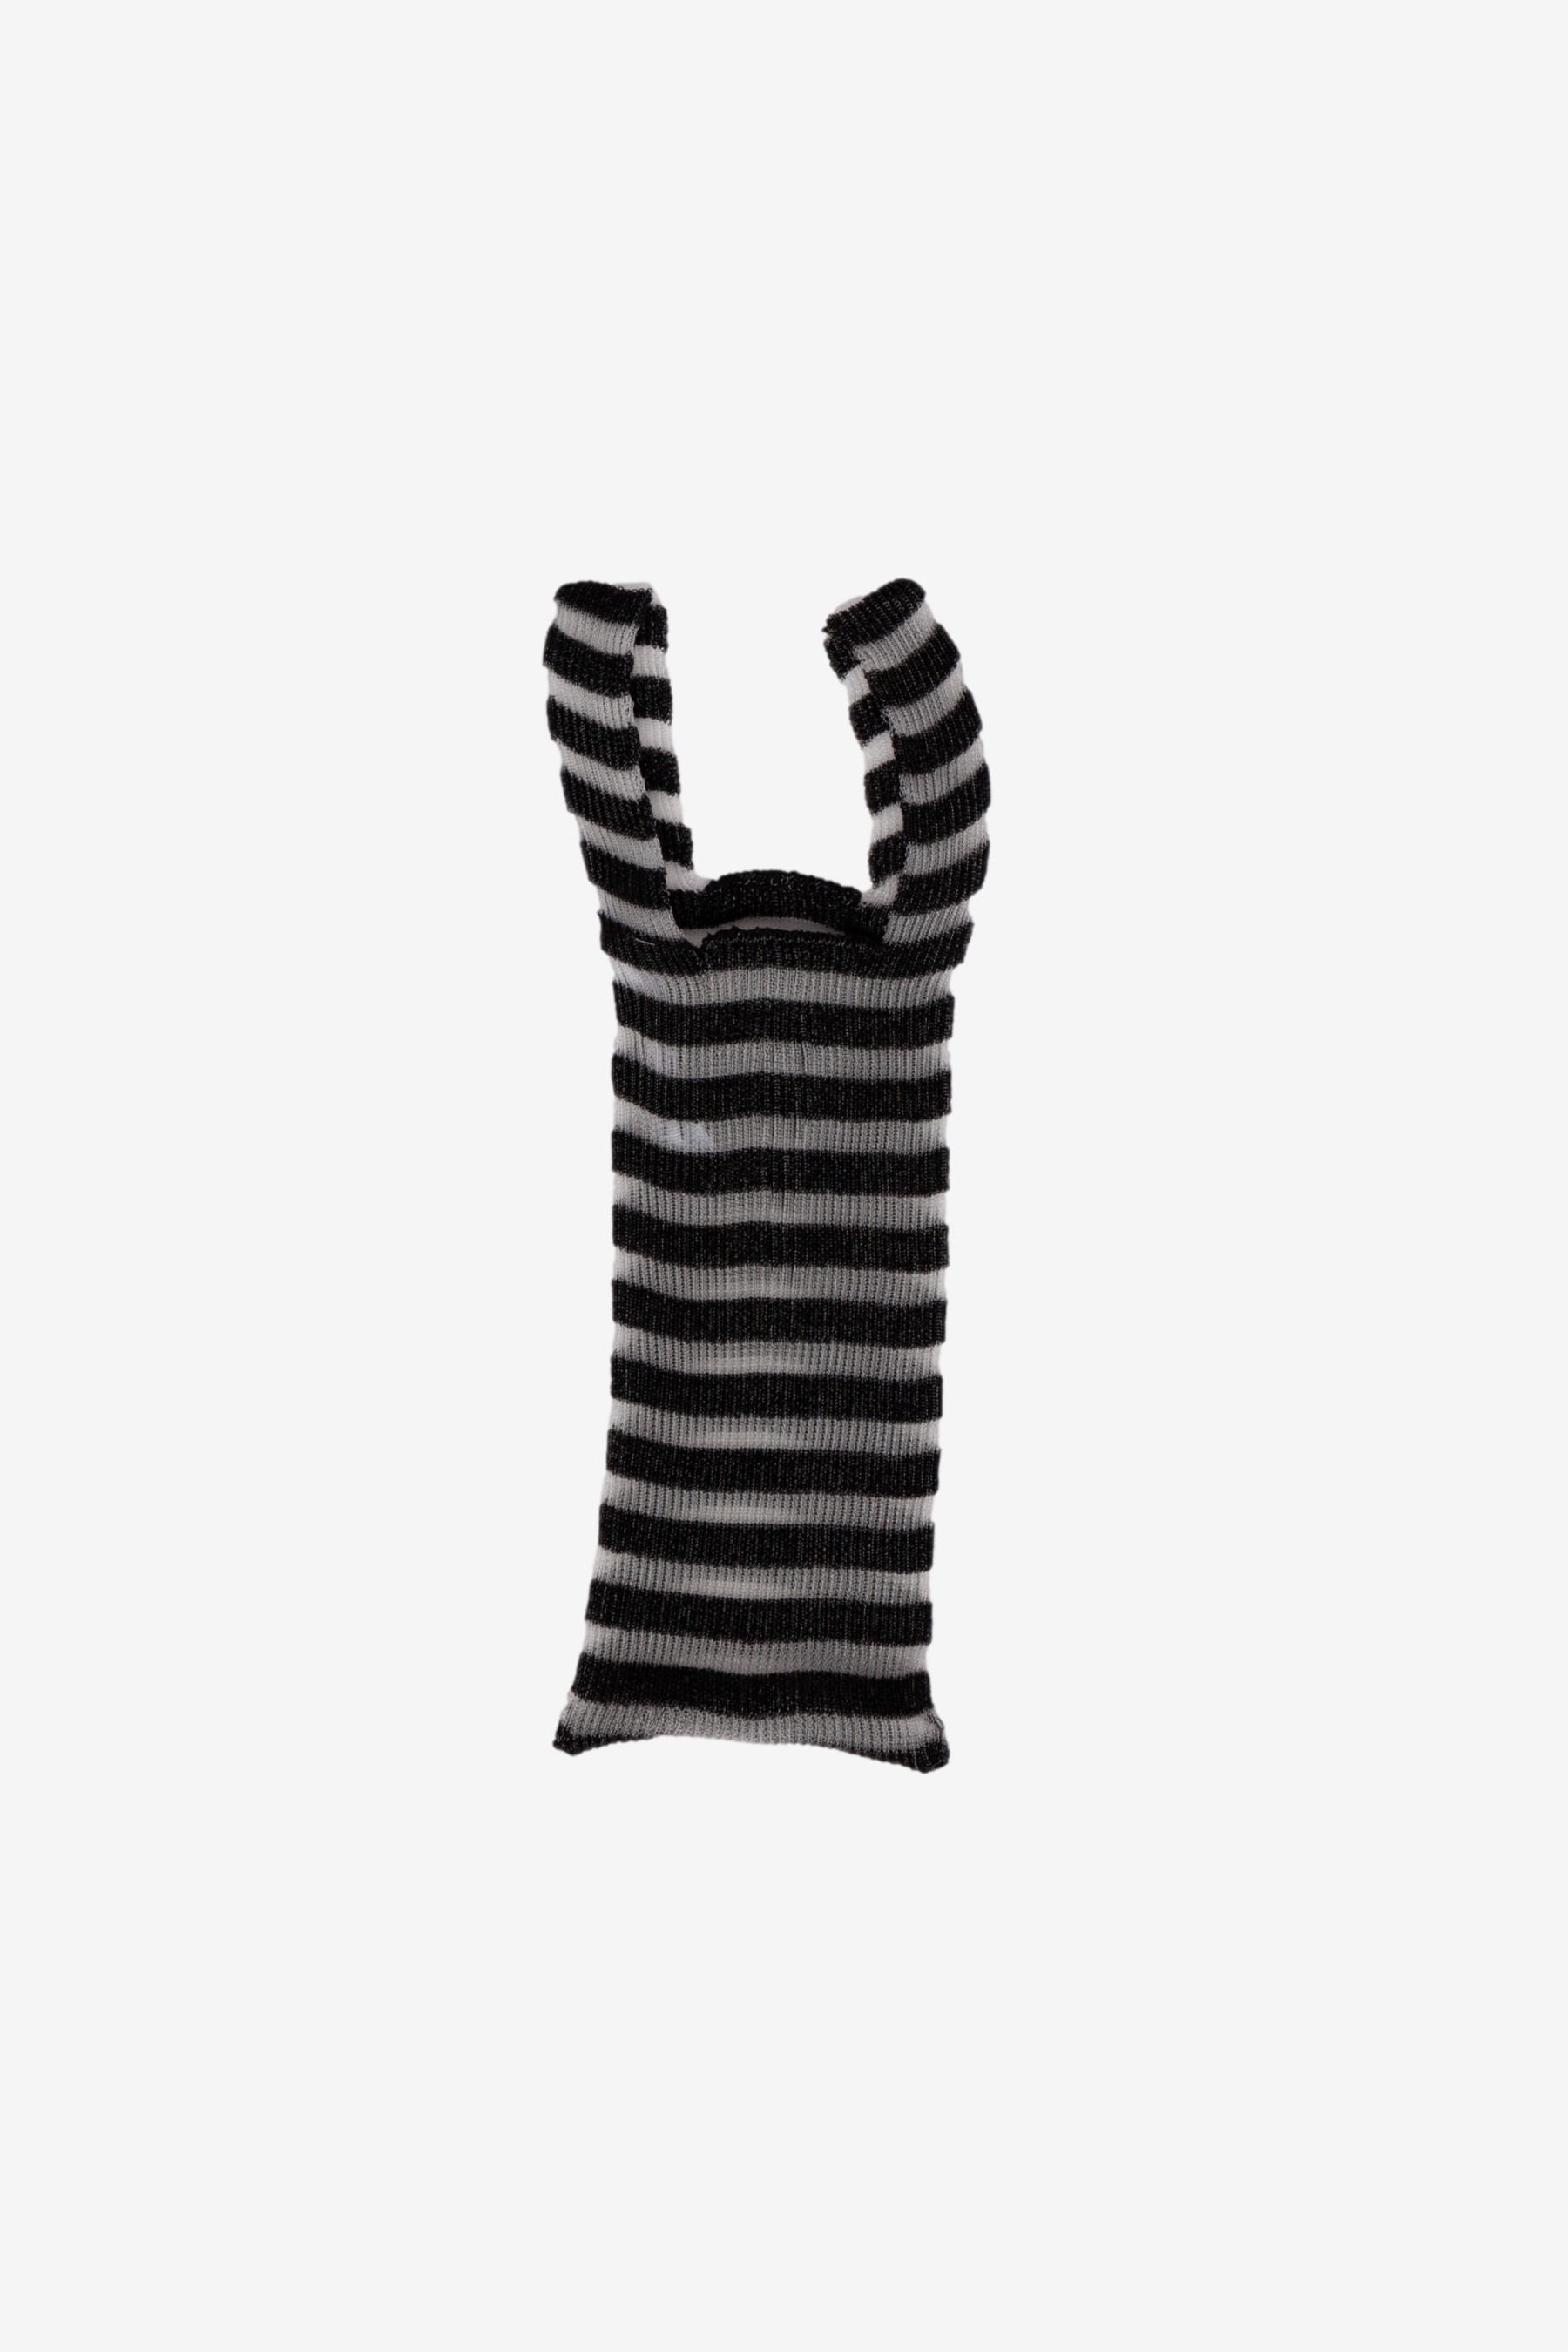 Ivy Bag in Black Stripes - A. Roege Hove | Afura Store